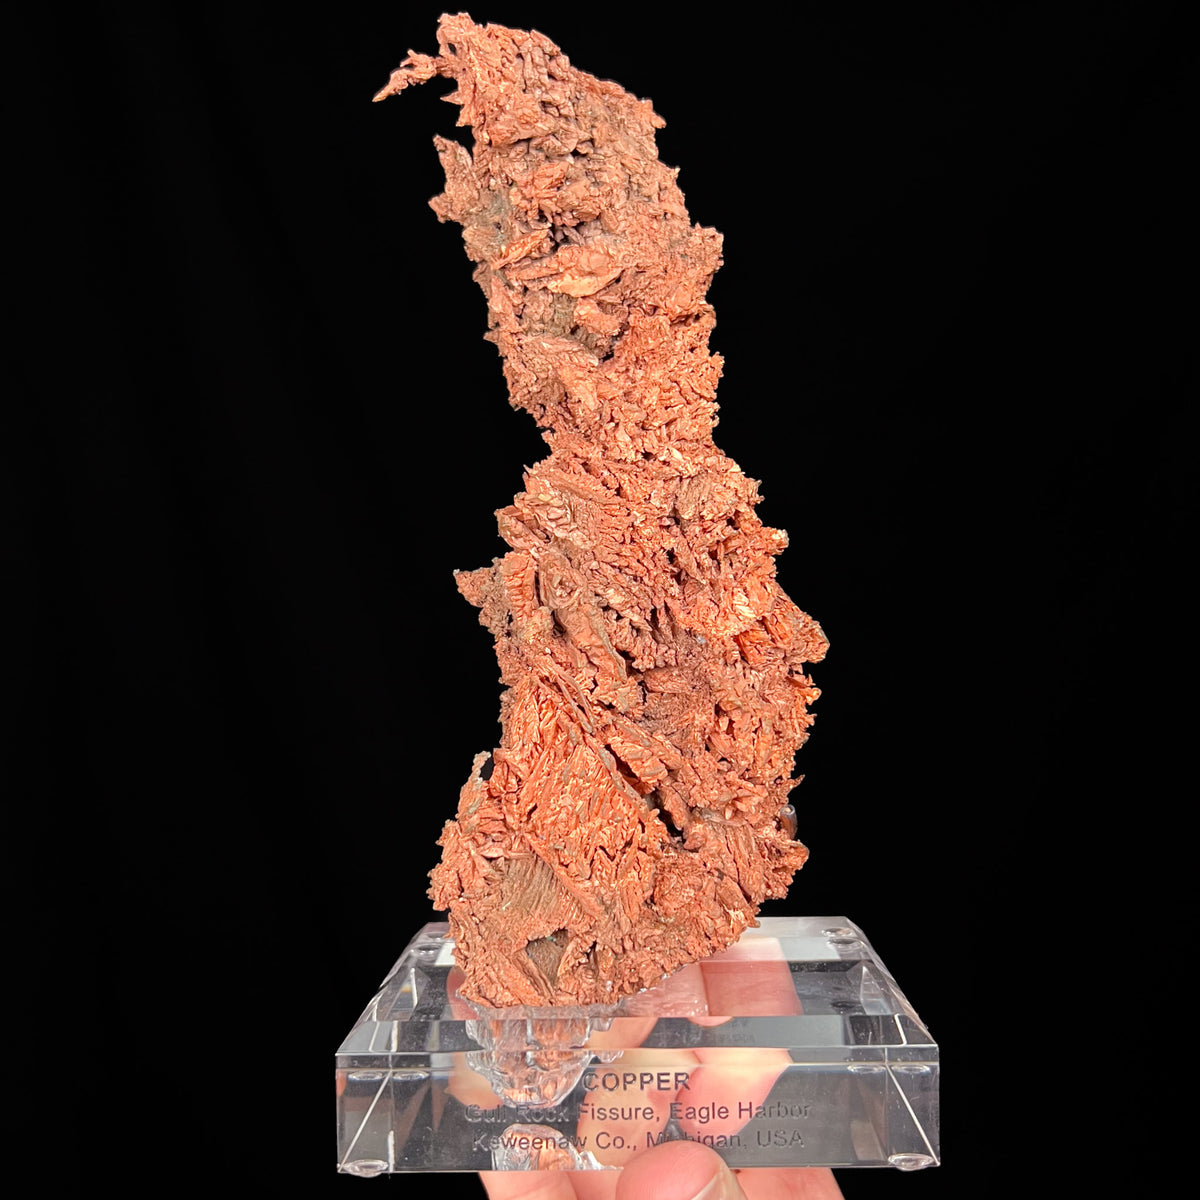 Extra Large Native Copper from Gull Rock Fissure, Eagle Harbor, Michigan